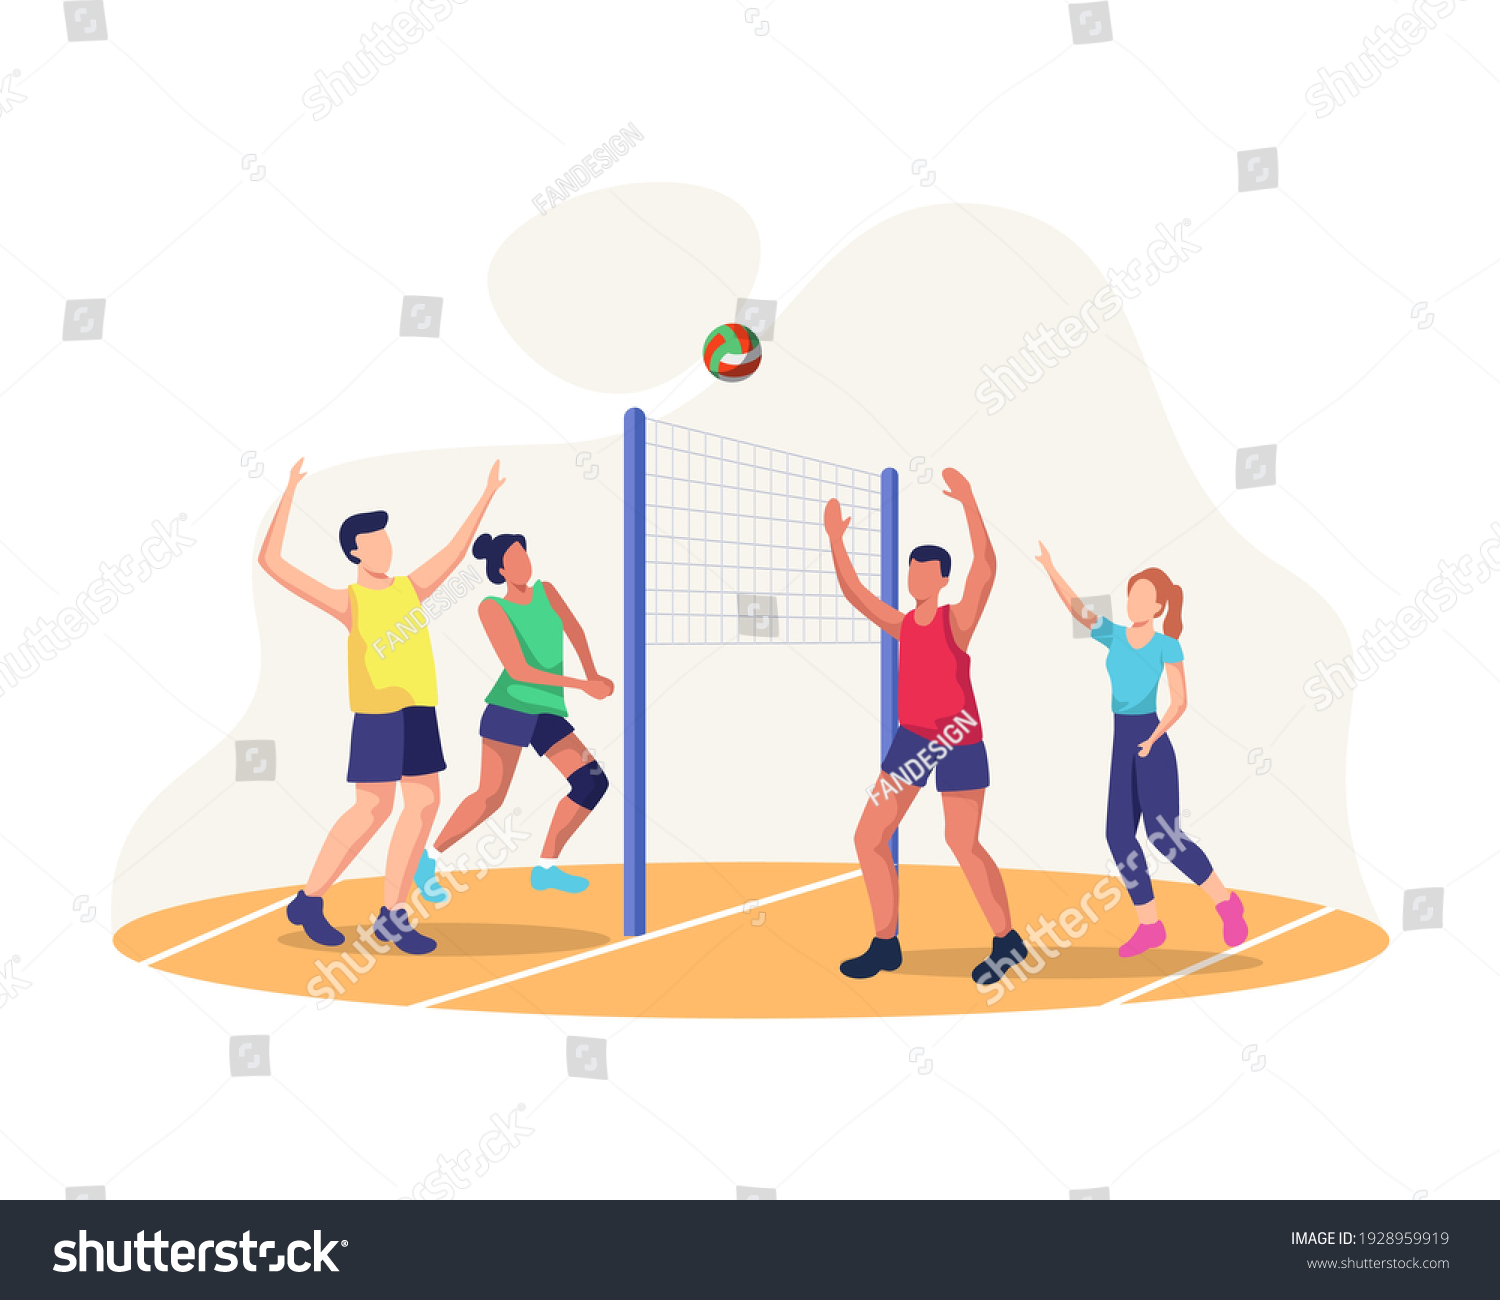 63,009 Volley ball game Images, Stock Photos & Vectors | Shutterstock